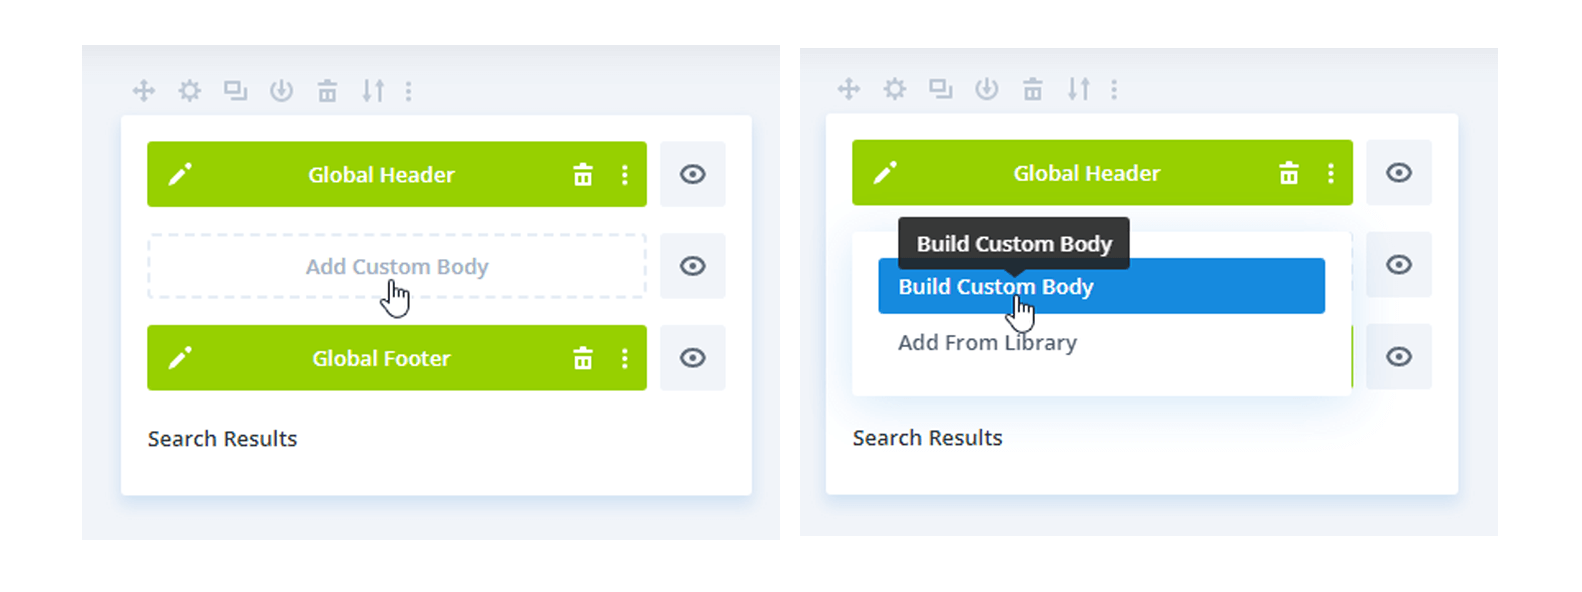 Creating a Custom body for Search Results page